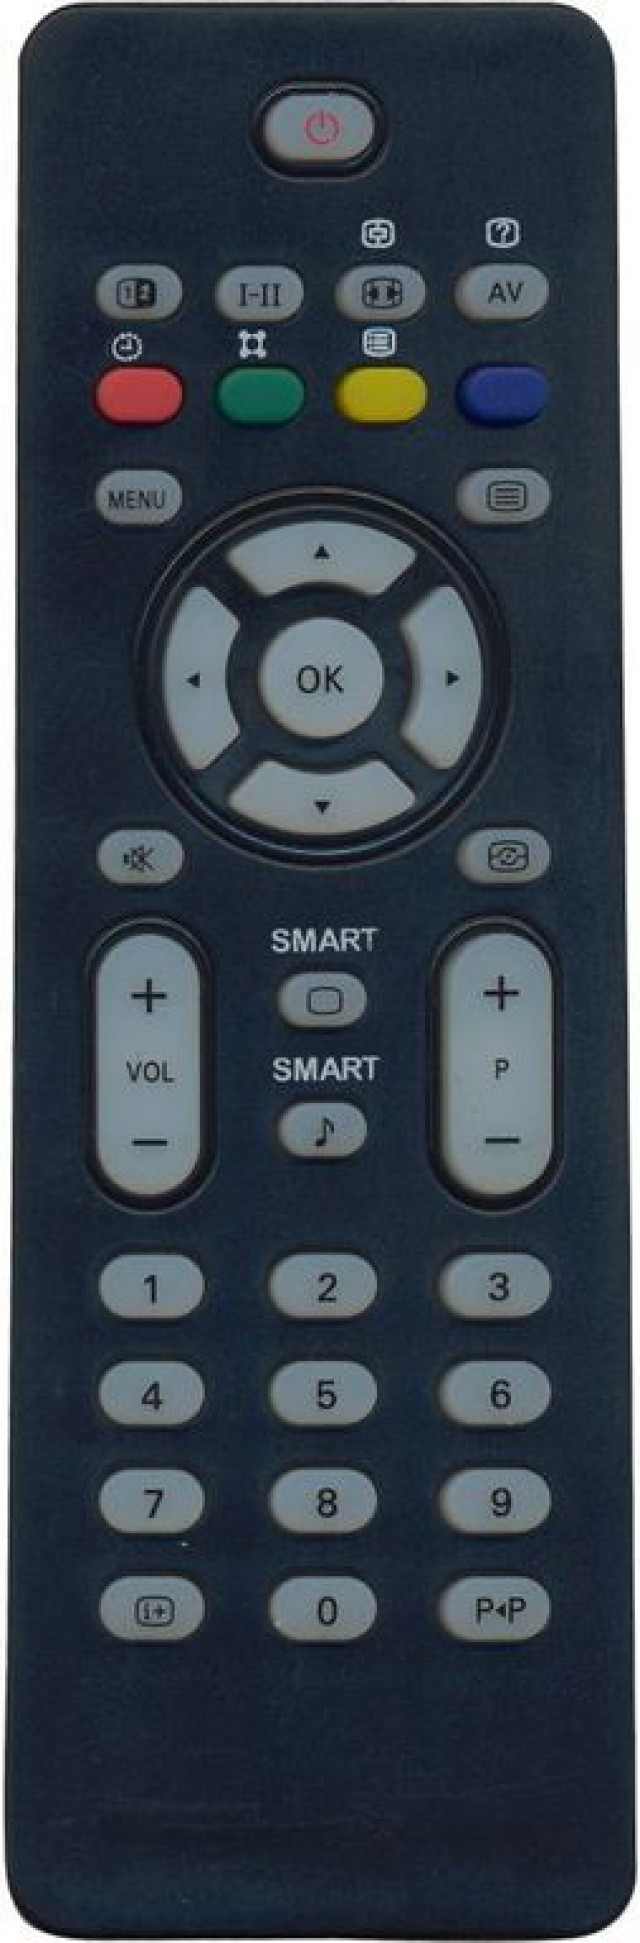 OEM, 0101, Remote control compatible with PHILIPS